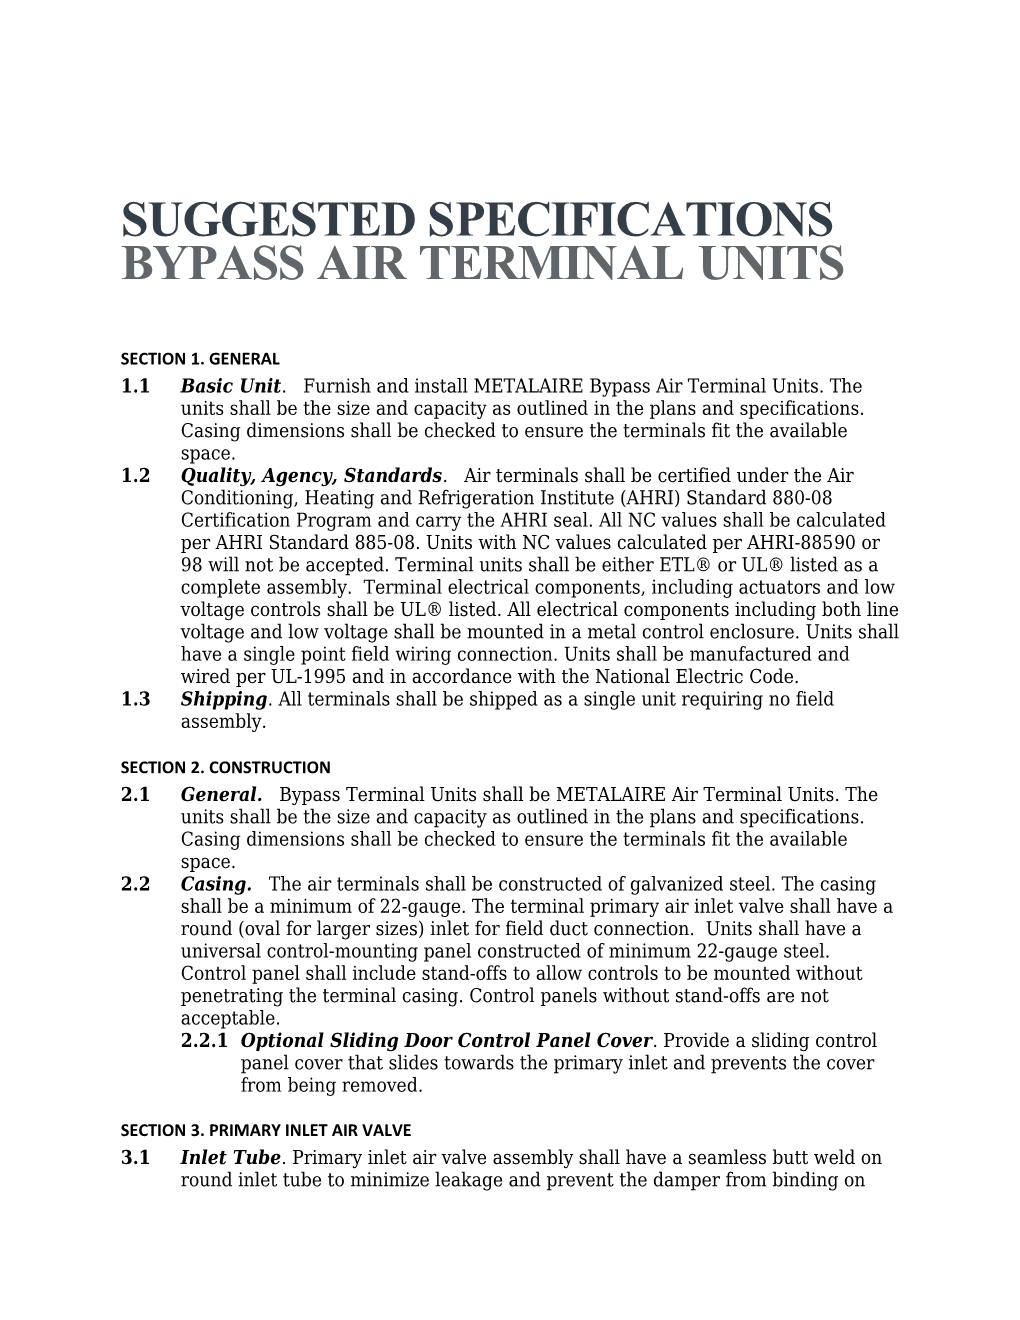 Suggested Specifications Bypass Air Terminalunits